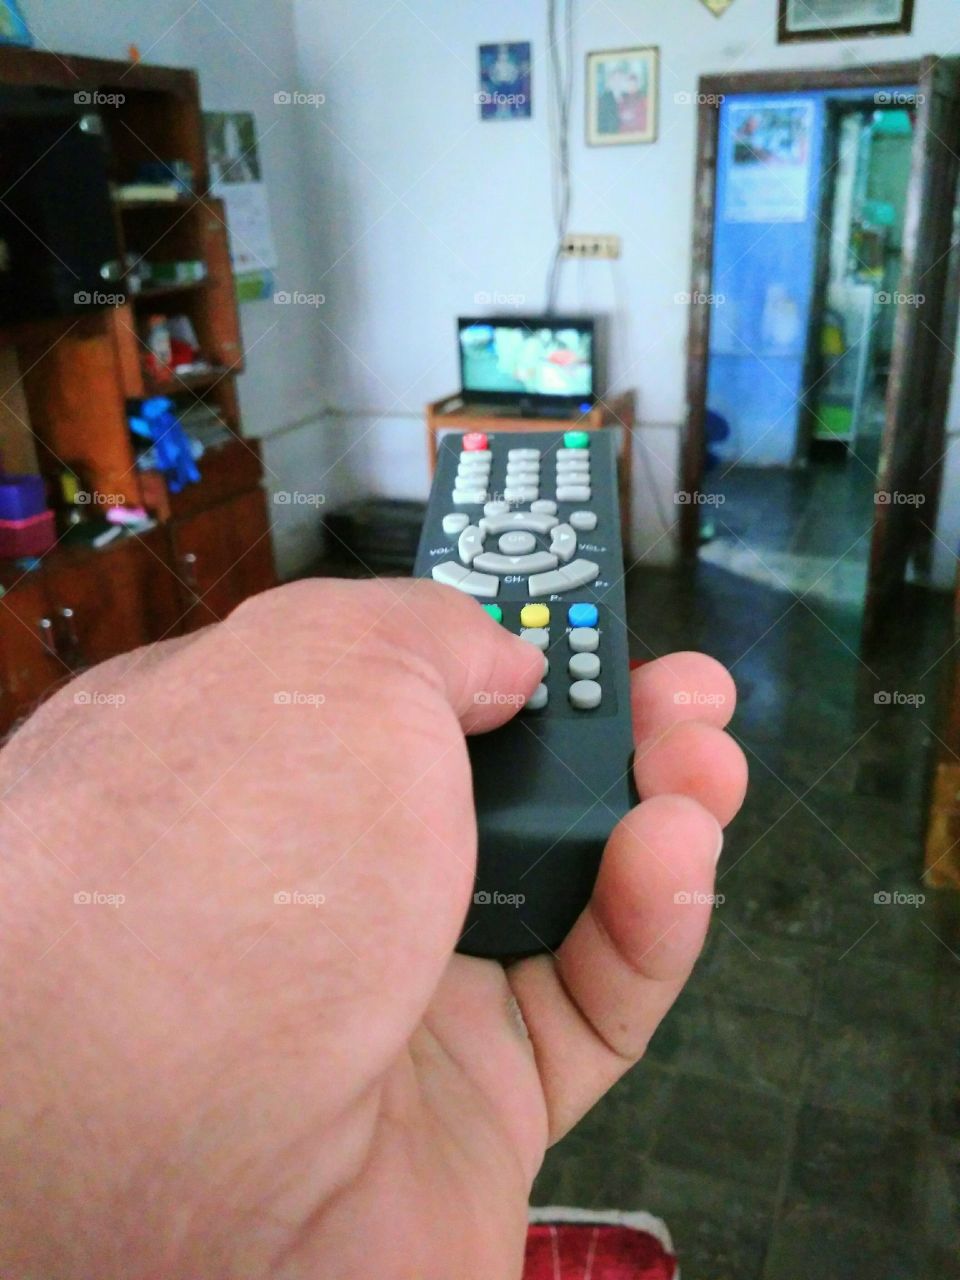 watch ball on tv turn down the volume using the remote


watch ball on tv turn down the volume using the remote


watch ball on tv turn down the volume using the remote